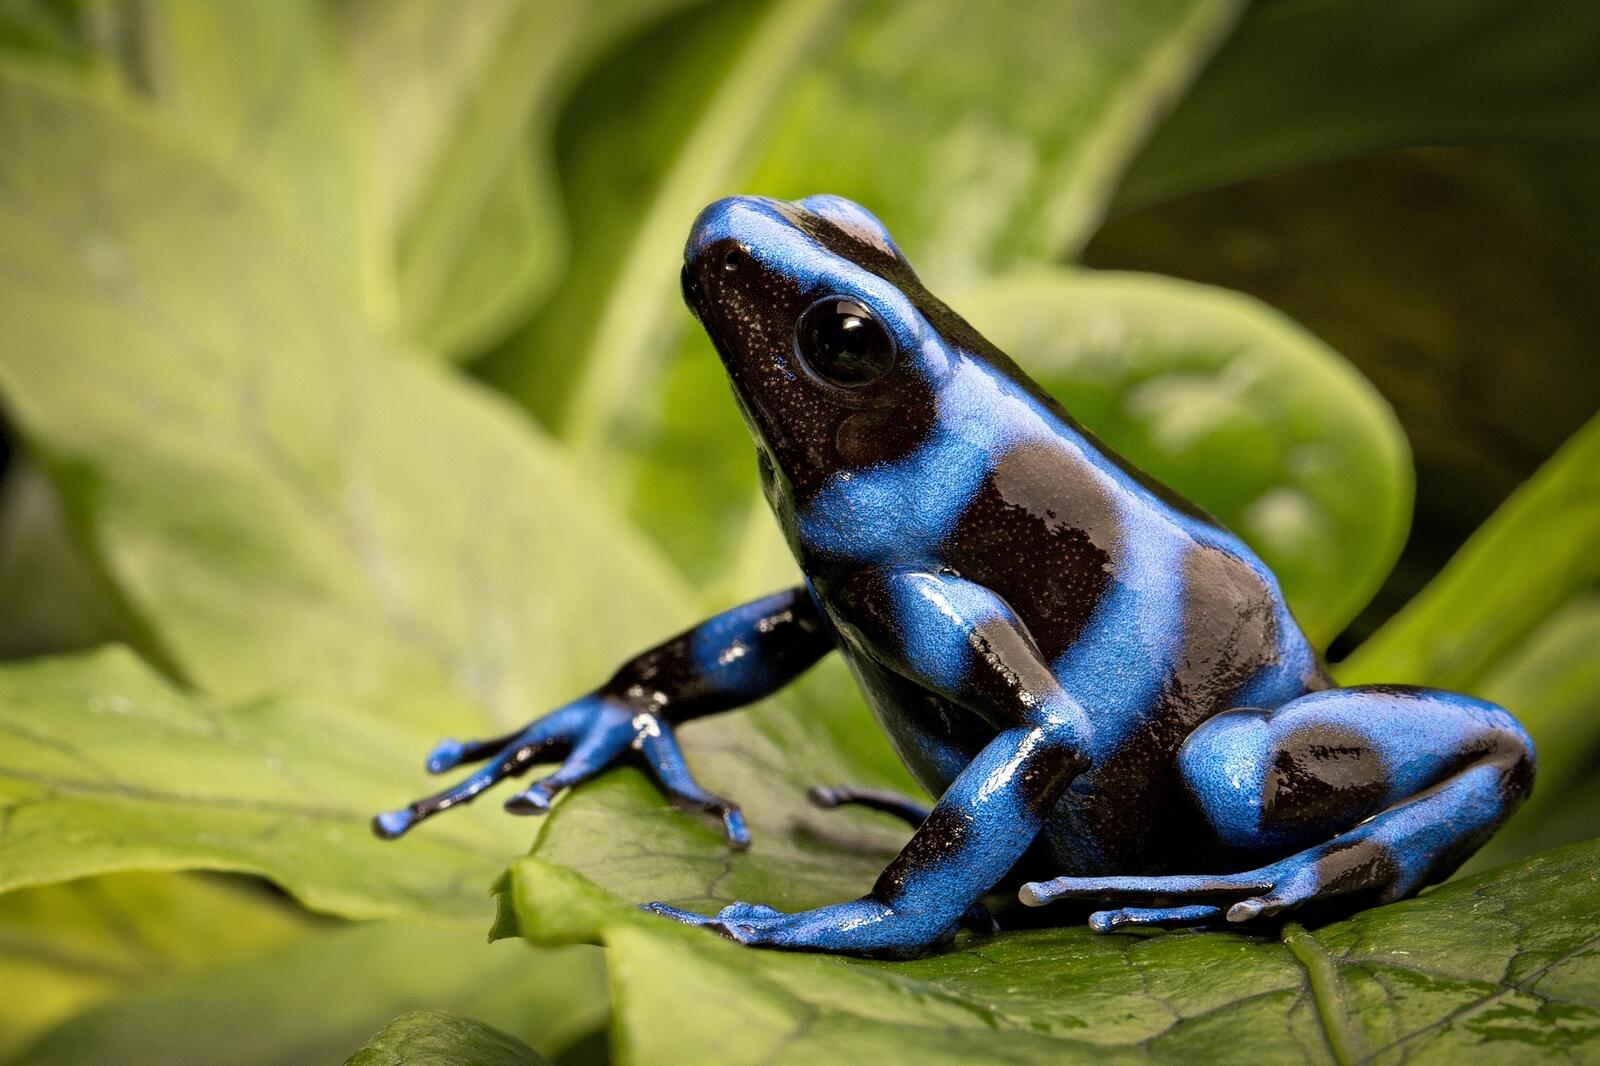 Free photo The poison dart frog is blue in color